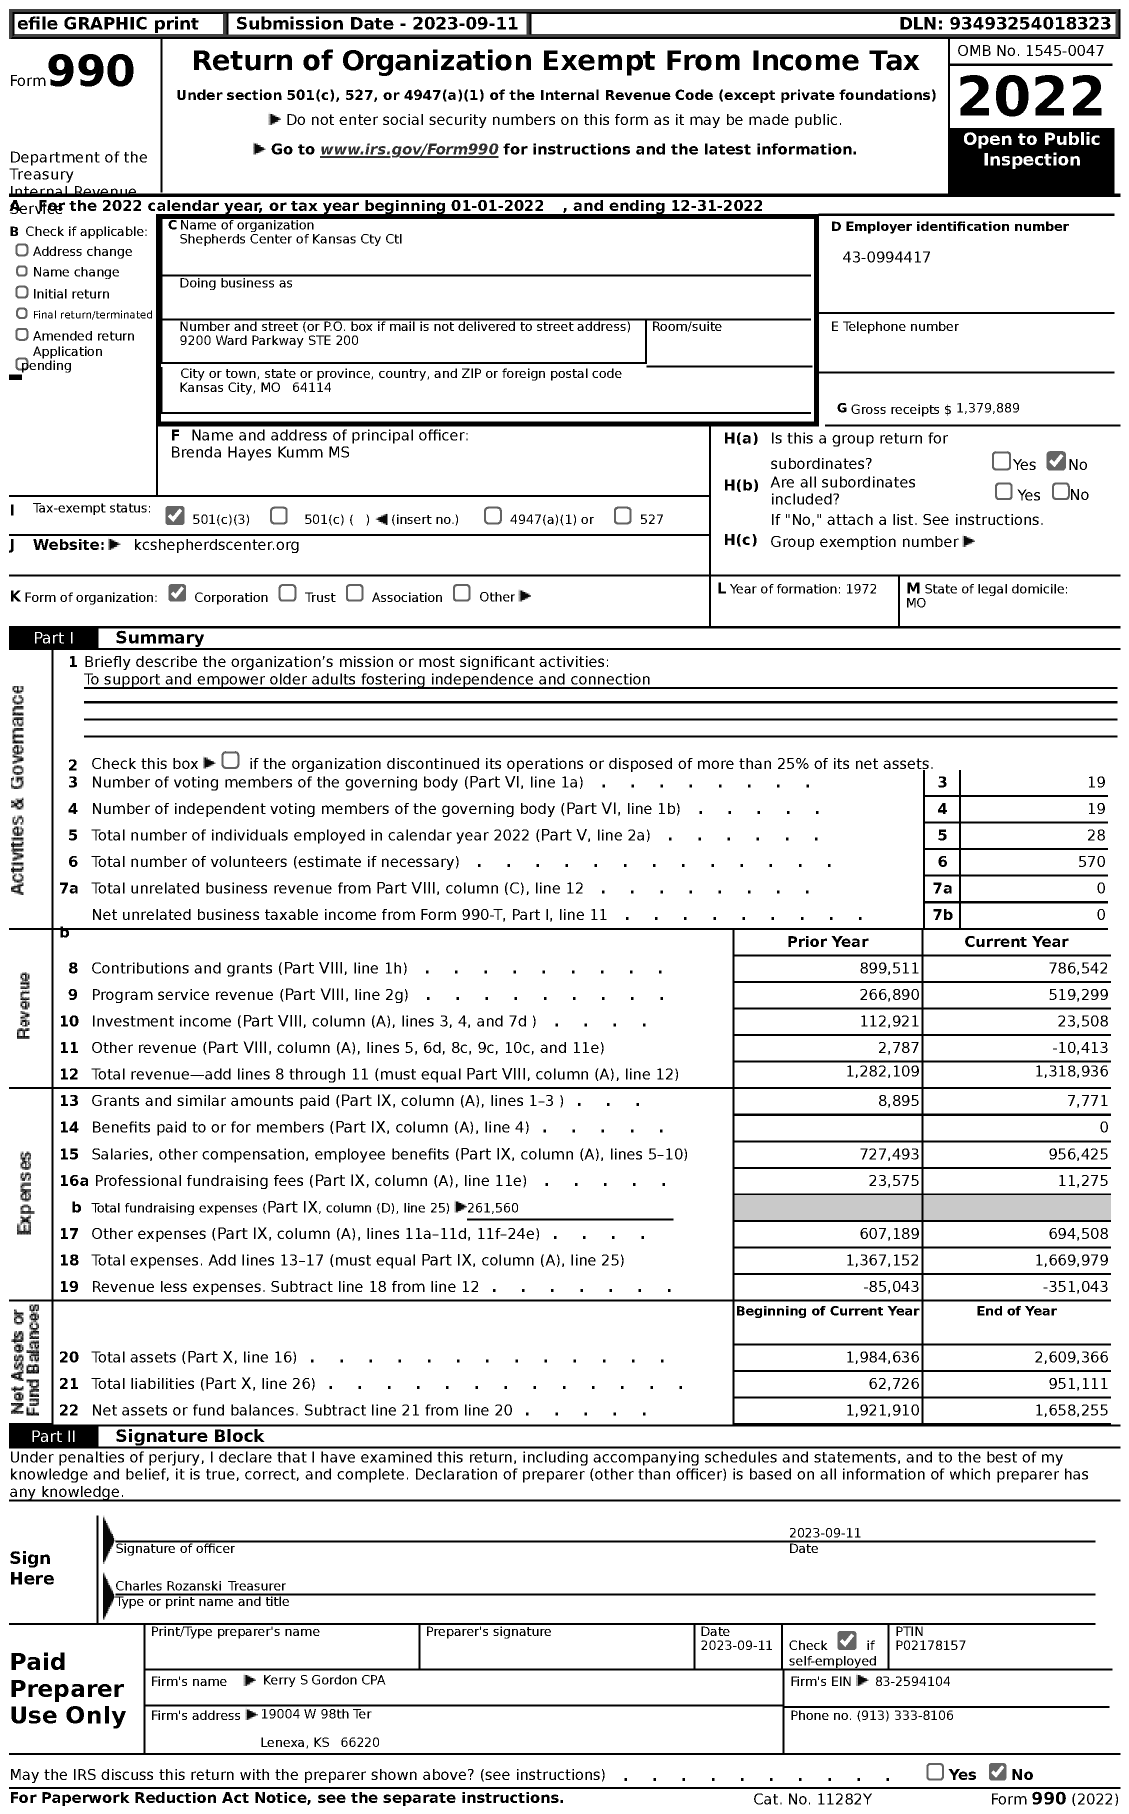 Image of first page of 2022 Form 990 for Shepherds Center of Kansas Cty Ctl